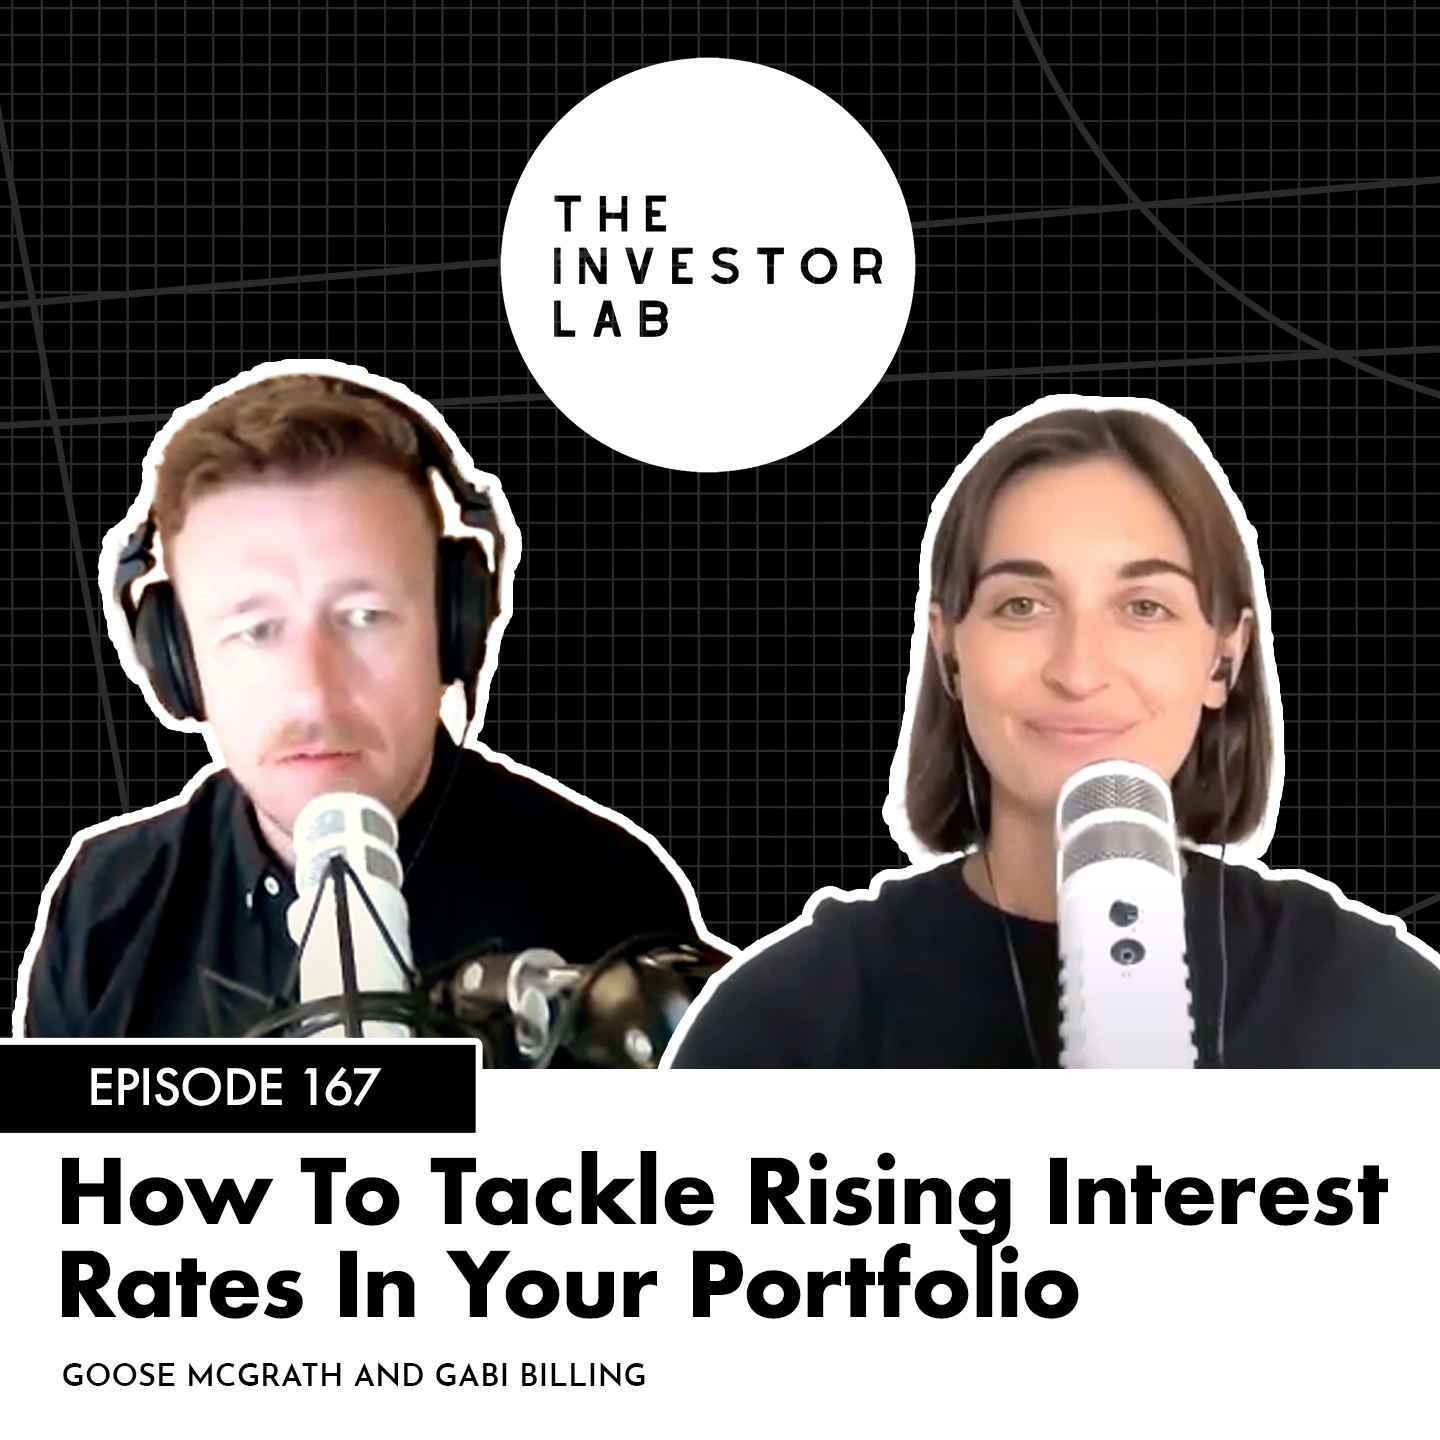 How To Tackle Rising Interest Rates In Your Portfolio